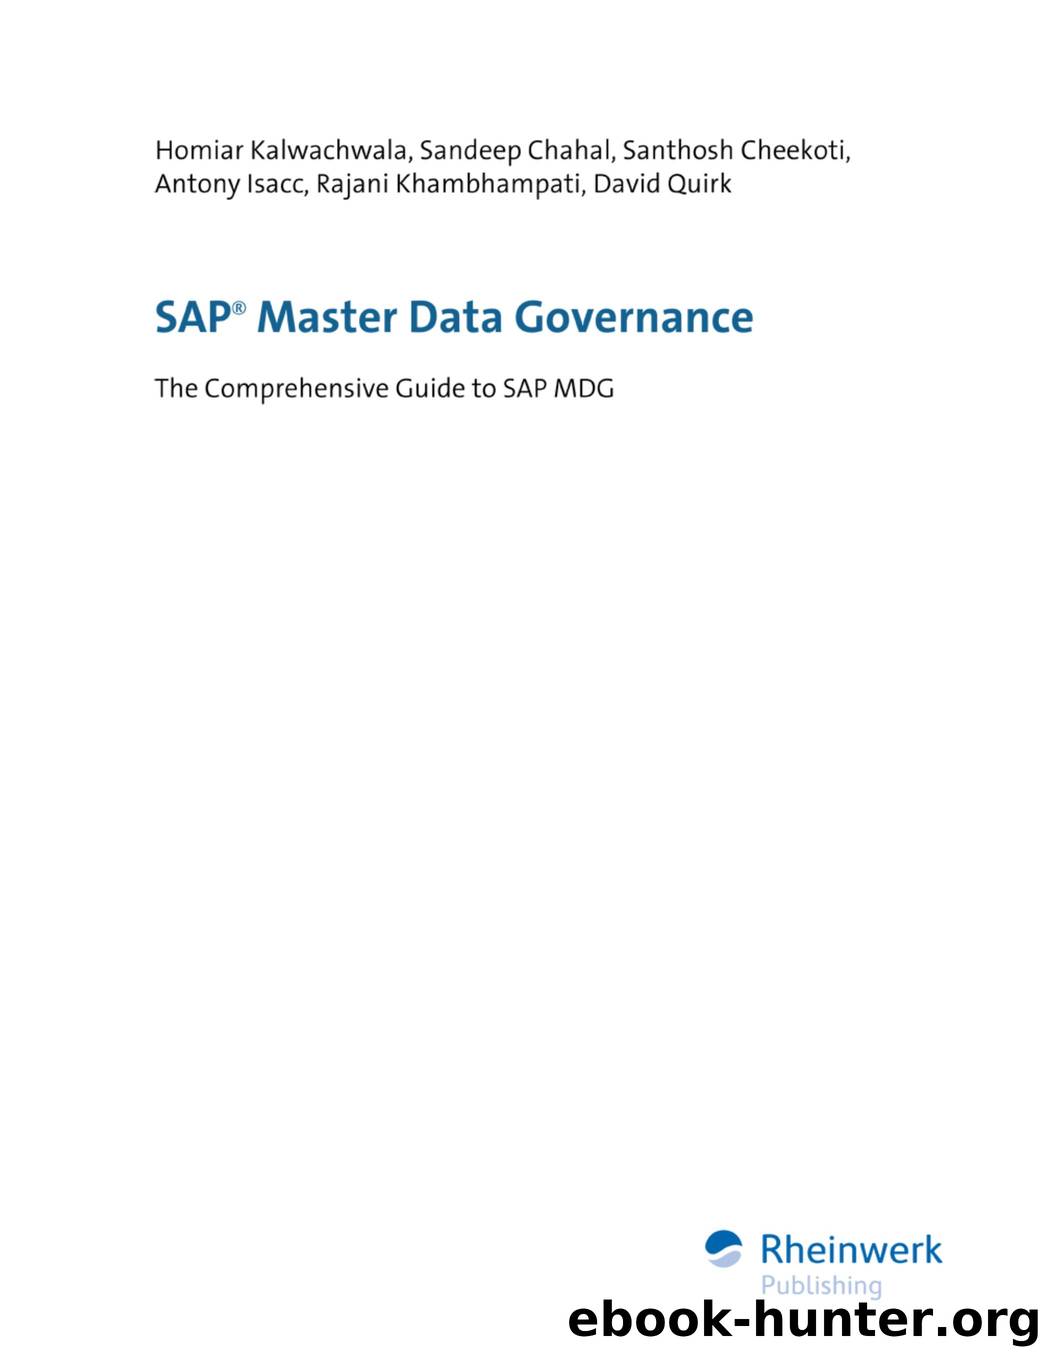 SAP Master Data Governance by The Comprehensive Guide to SAP MDG